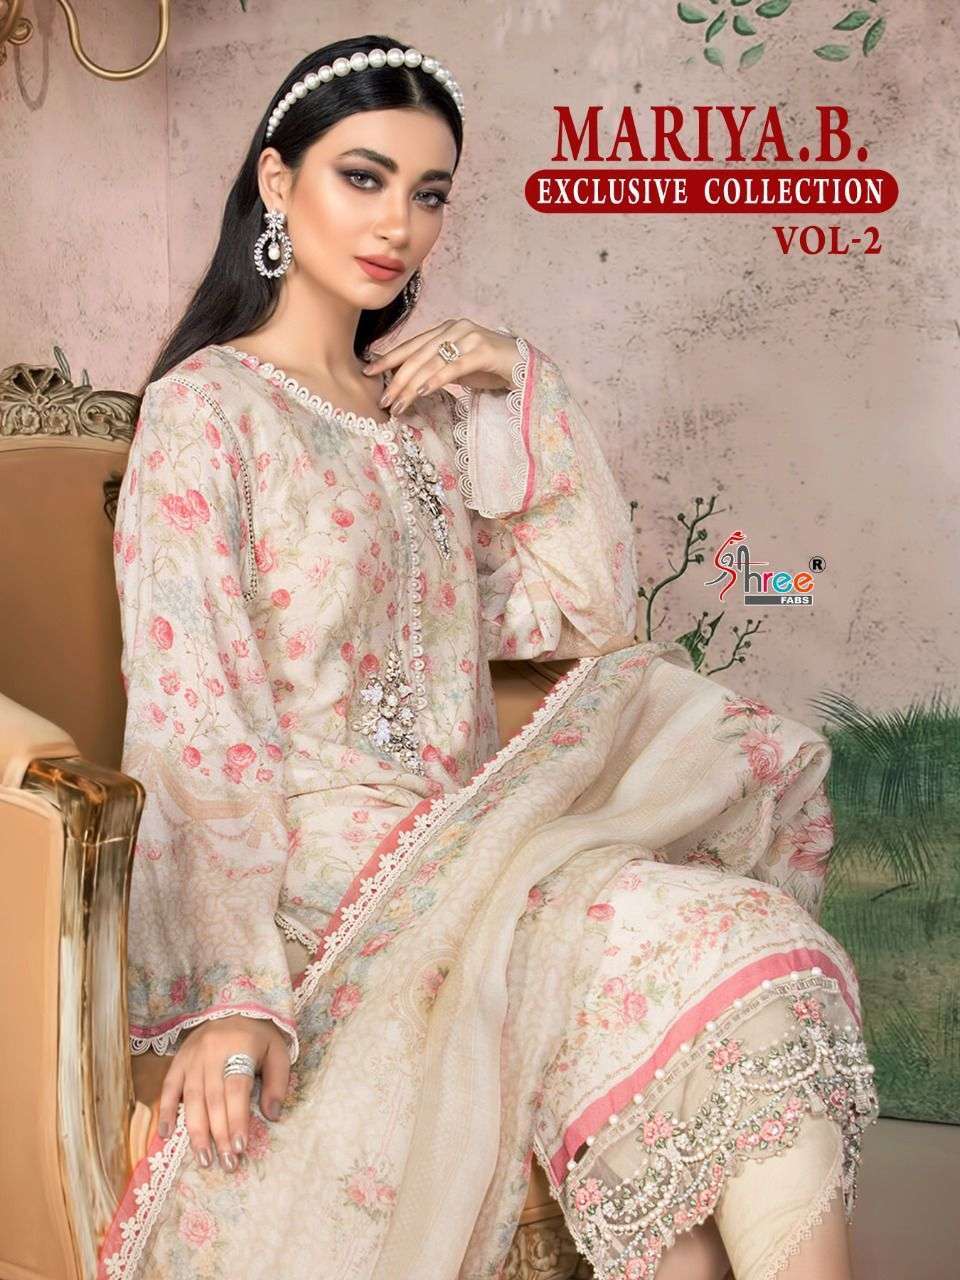 Shree fabs maria b exclusive vol 2 printed pure cotton with ...